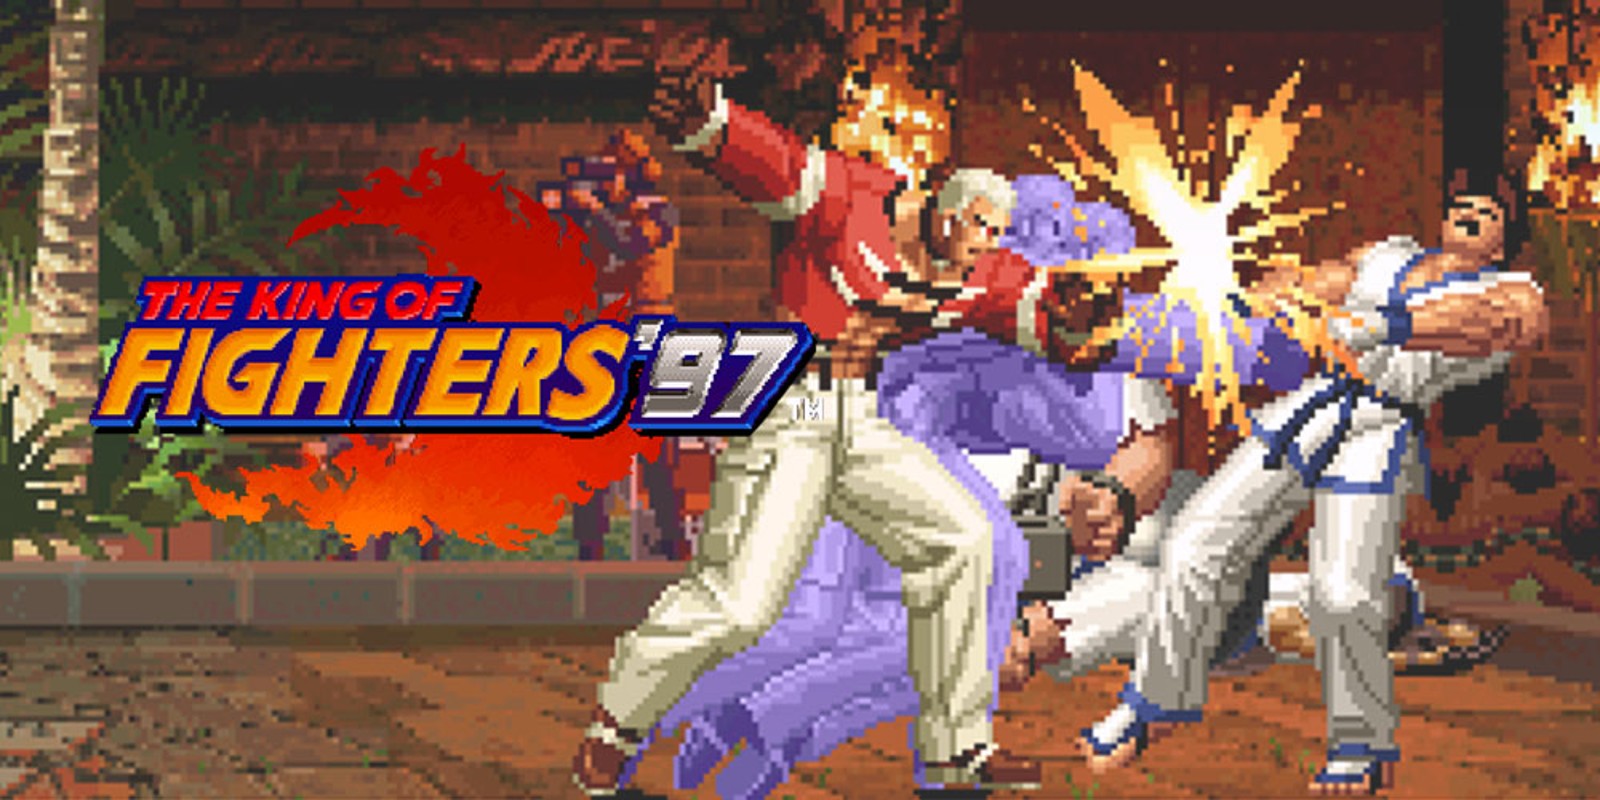 King of fighter 97 game